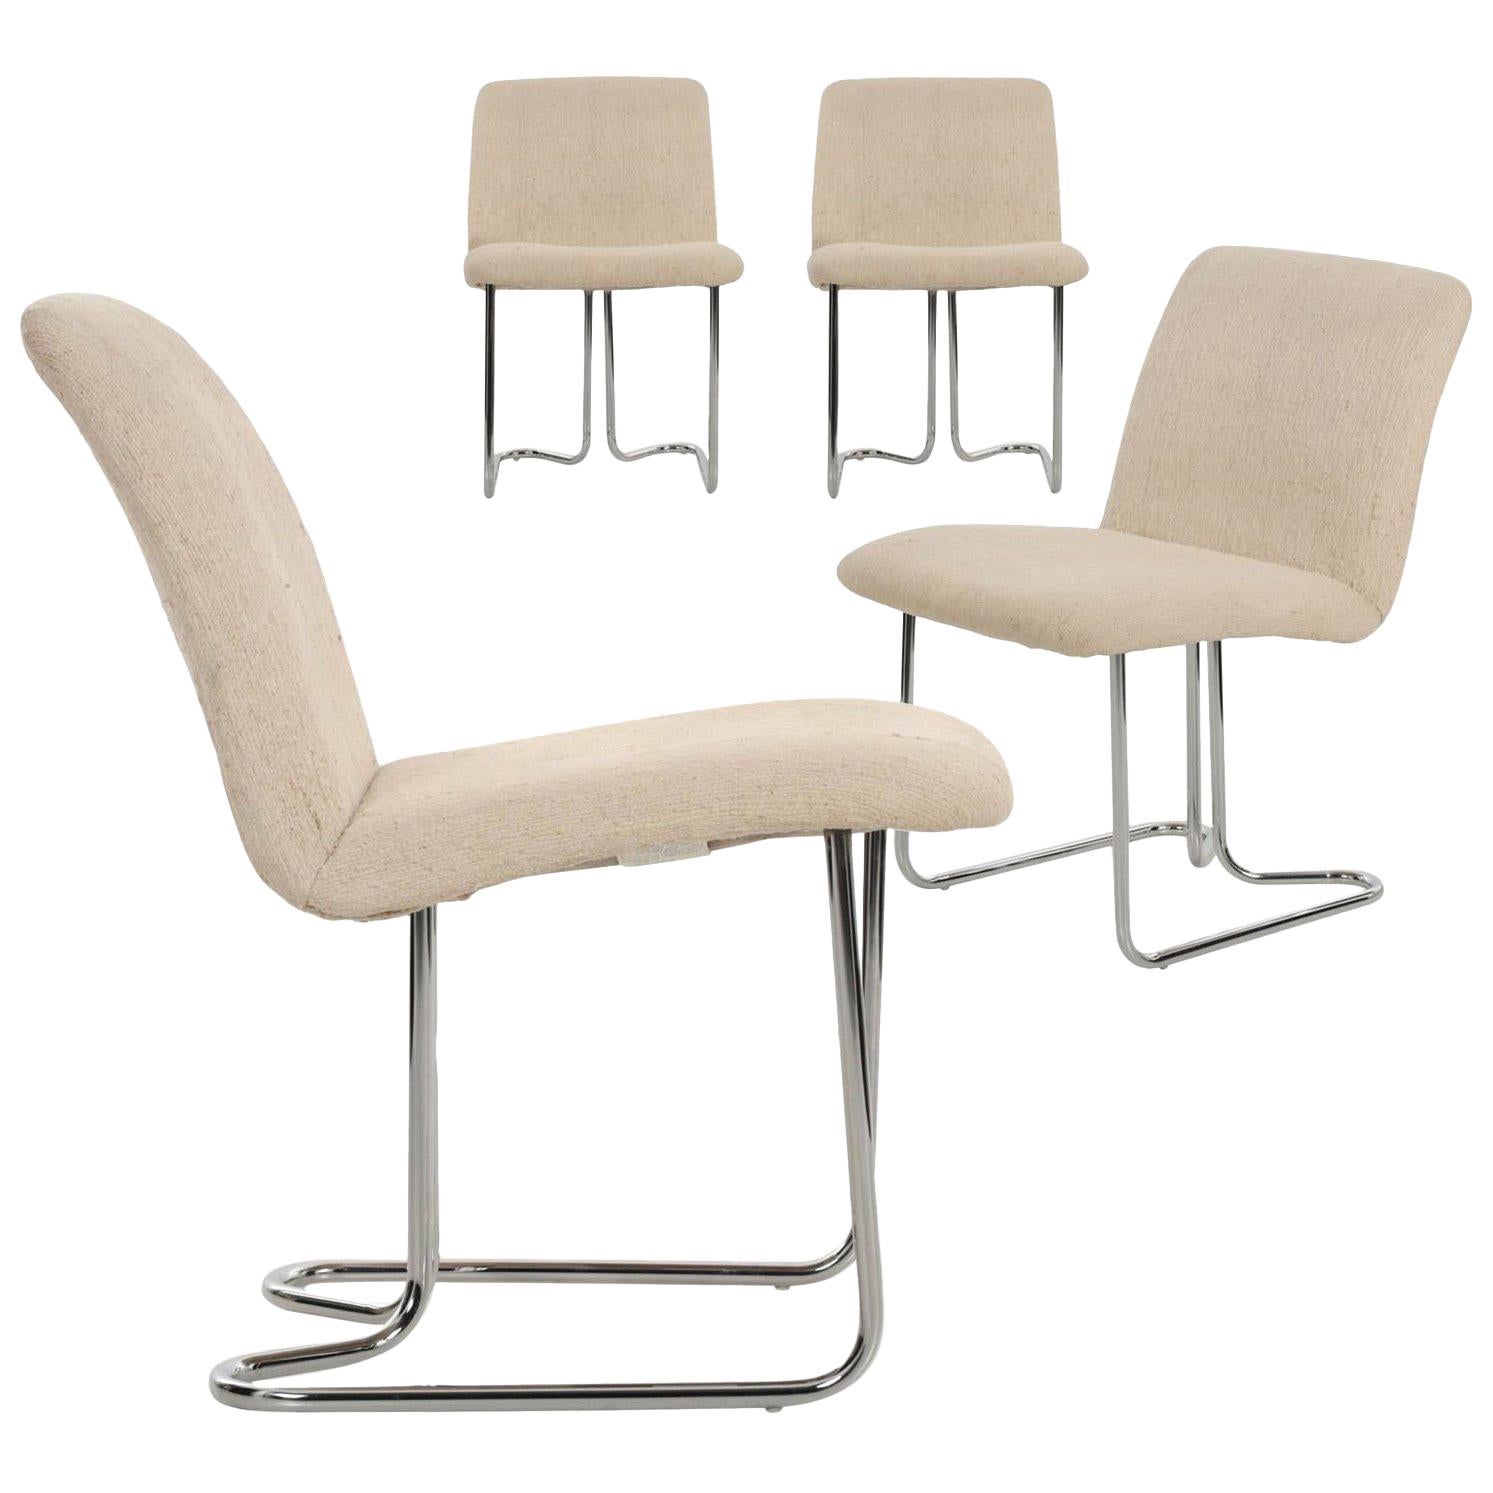 Design Institute America Set of Four Chromed Steel Dining Chairs, circa 1970s